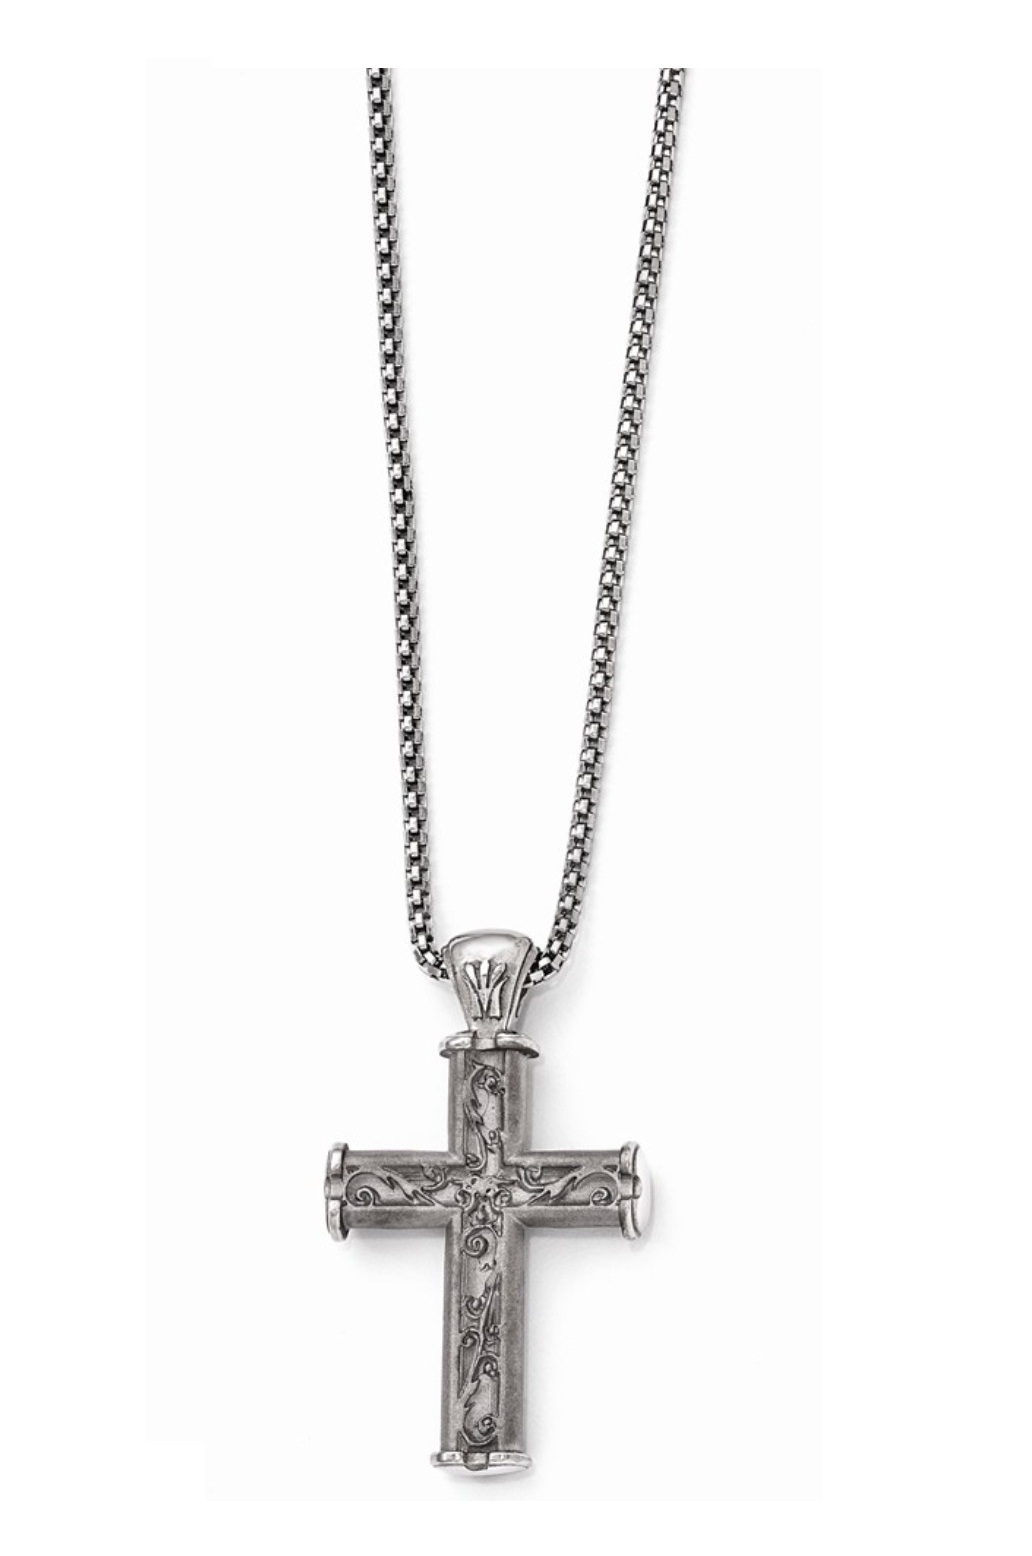  Titanium Casted Satin And Polished Cross Pendant Necklace